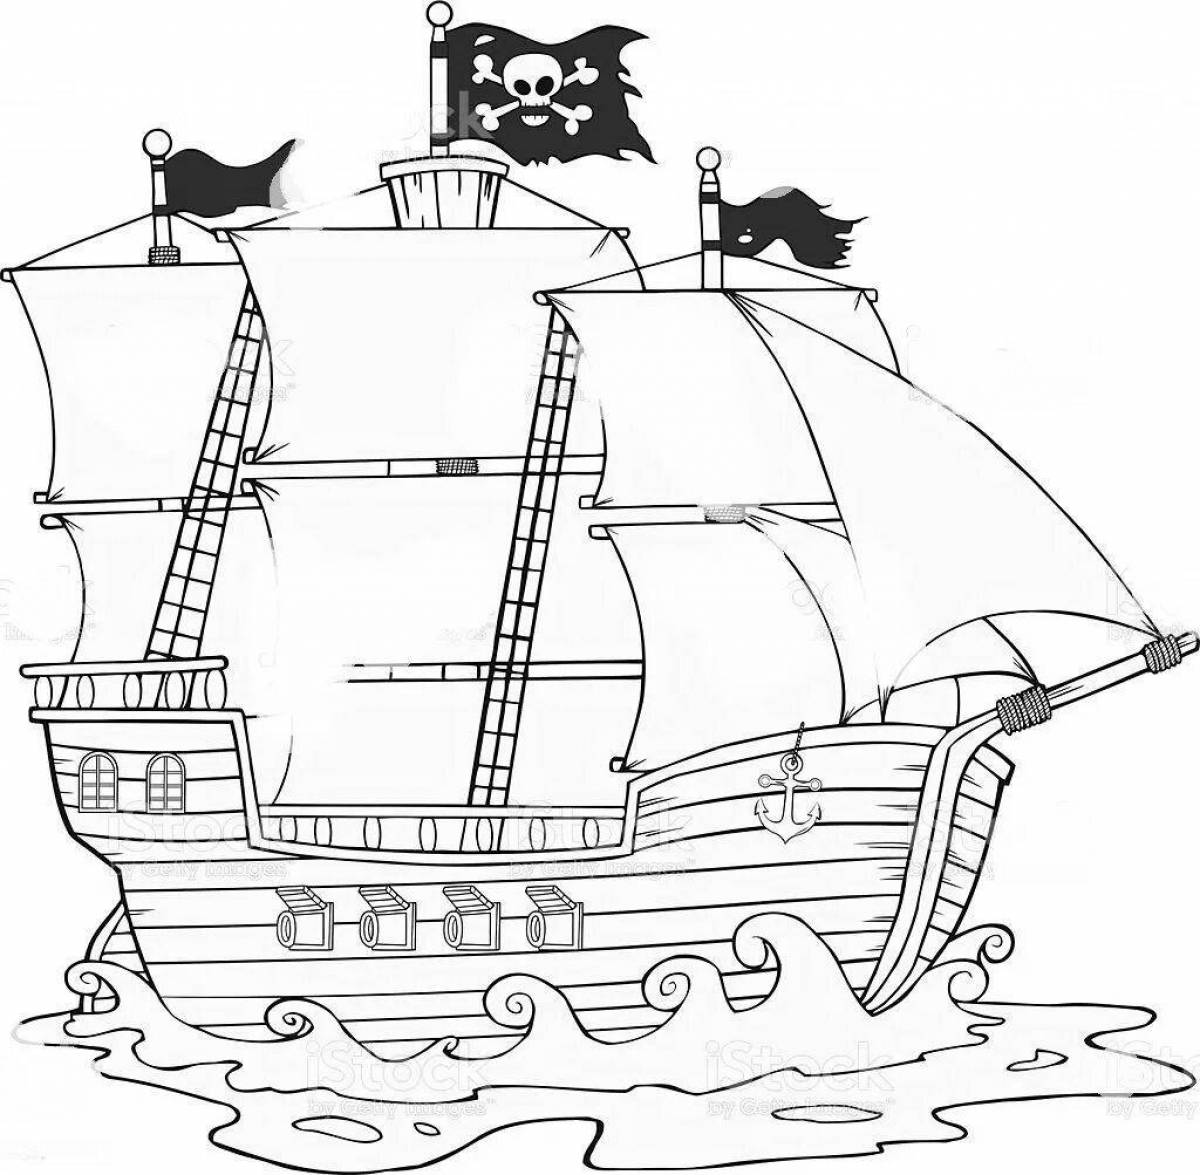 Charming black pearl coloring page